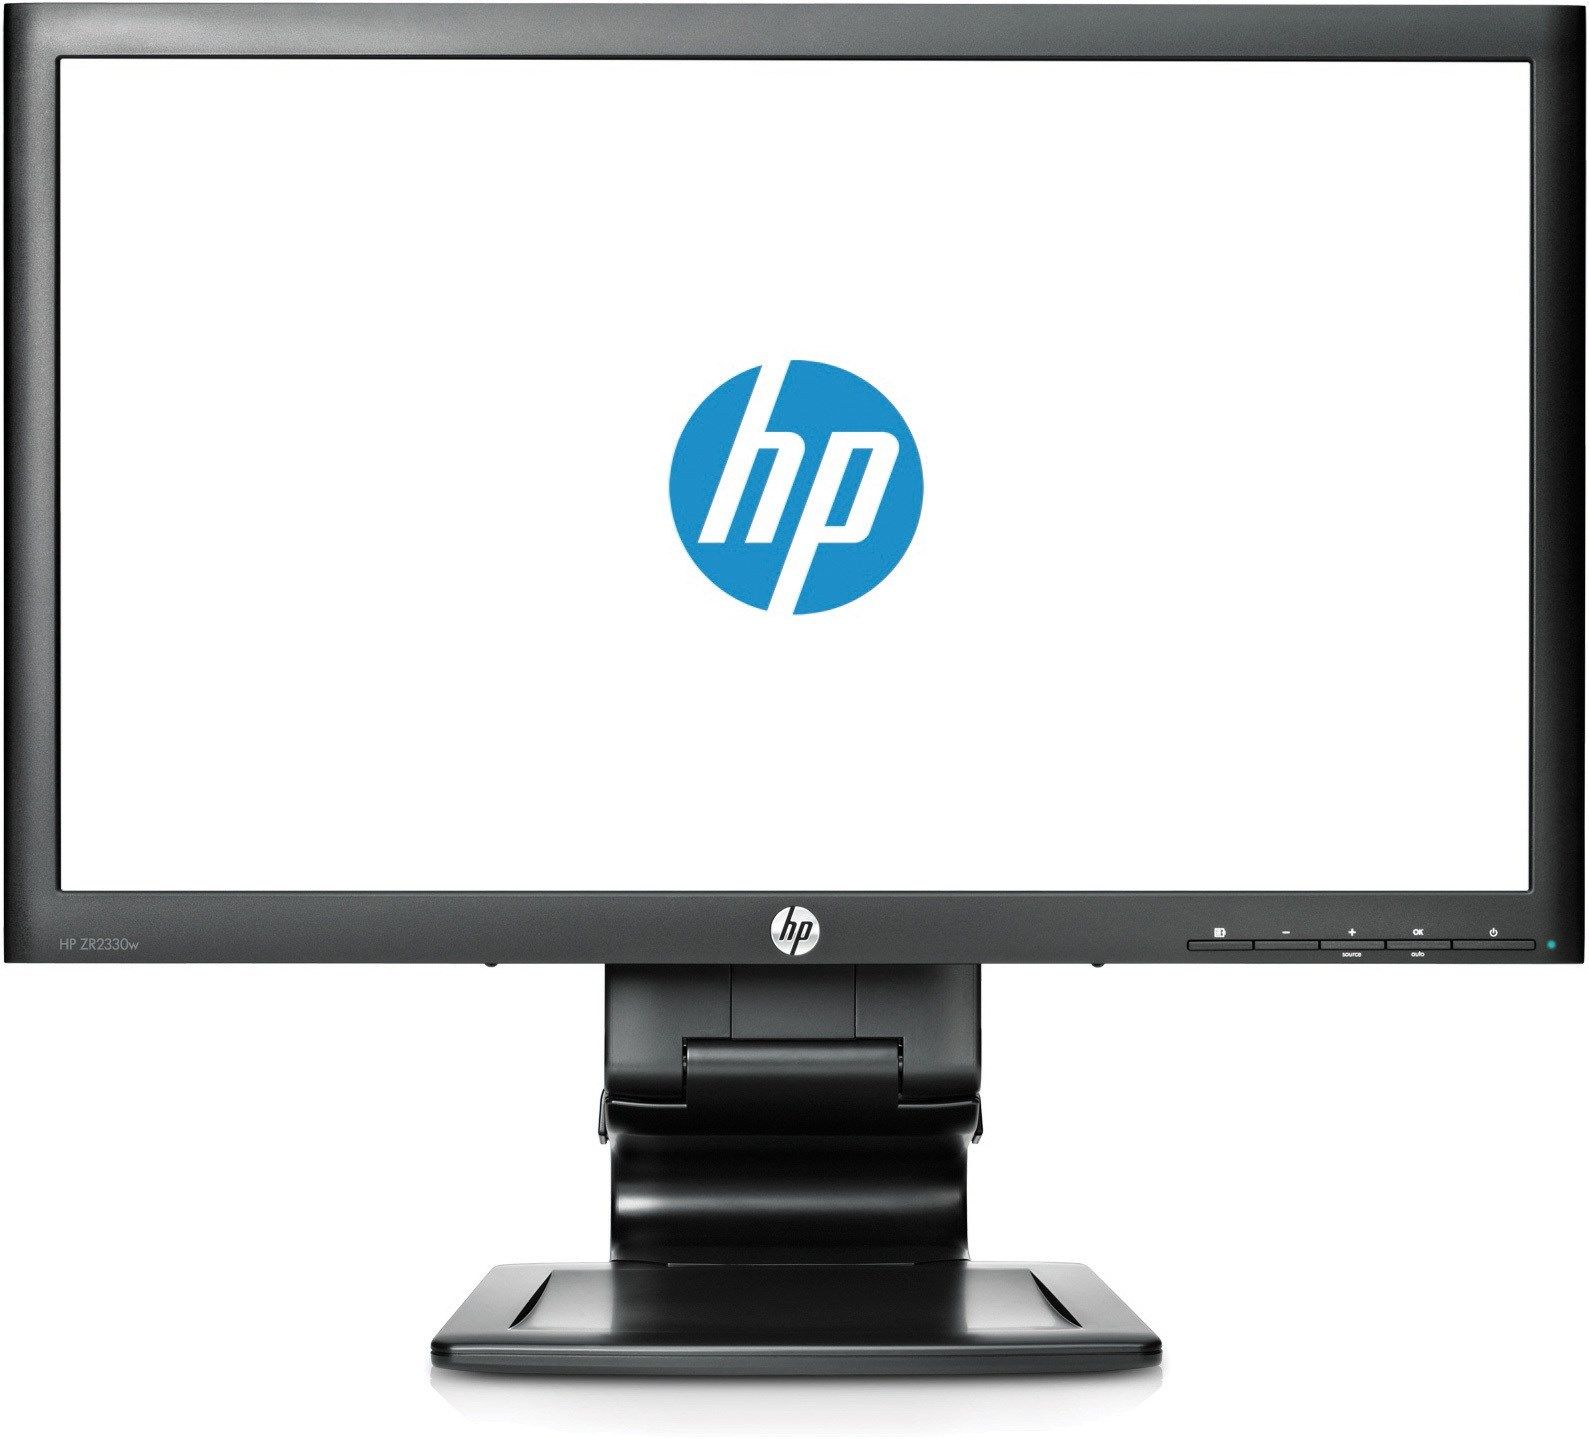 HP ZR2330w 23" High Definition LED Backlit LCD Monitor IPS Panel Display